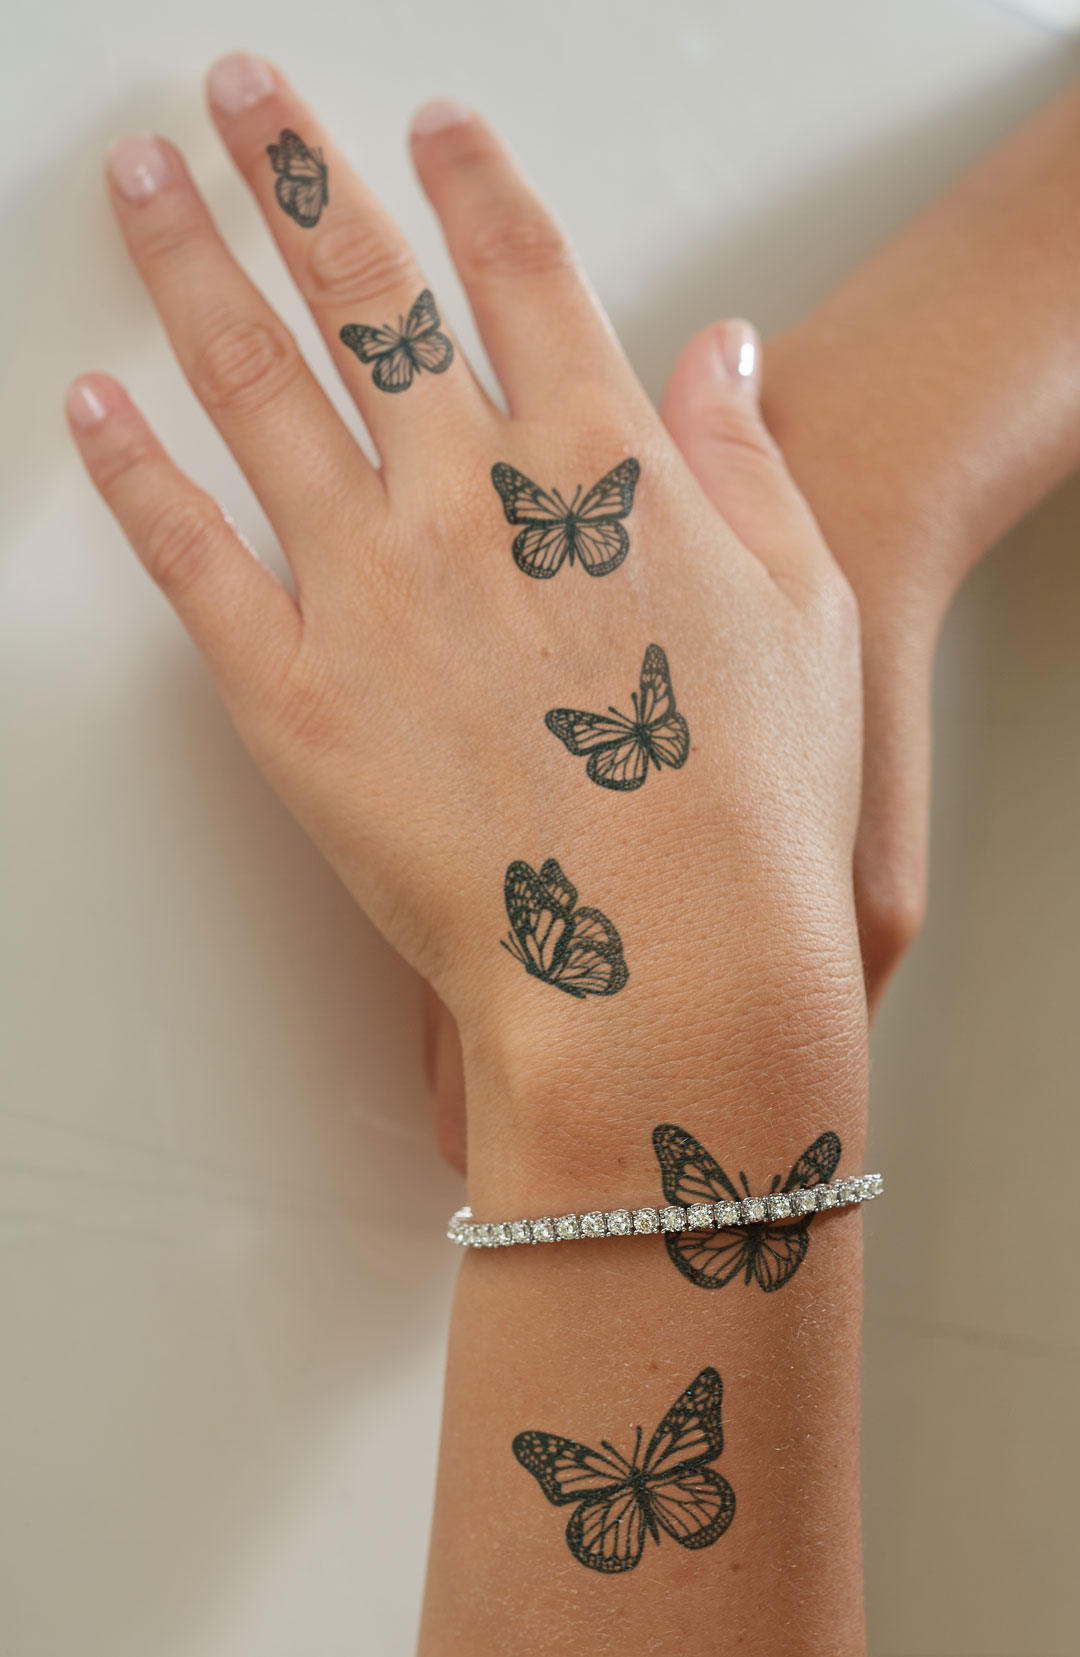 Inkbox Temporary Tattoos Semi-Permanent Tattoo One Premium Easy Long  Lasting Water-Resistant Temp Tattoo with For Now Ink - Lasts 1-2 Weeks  Soaring Demise 4 x 4 in